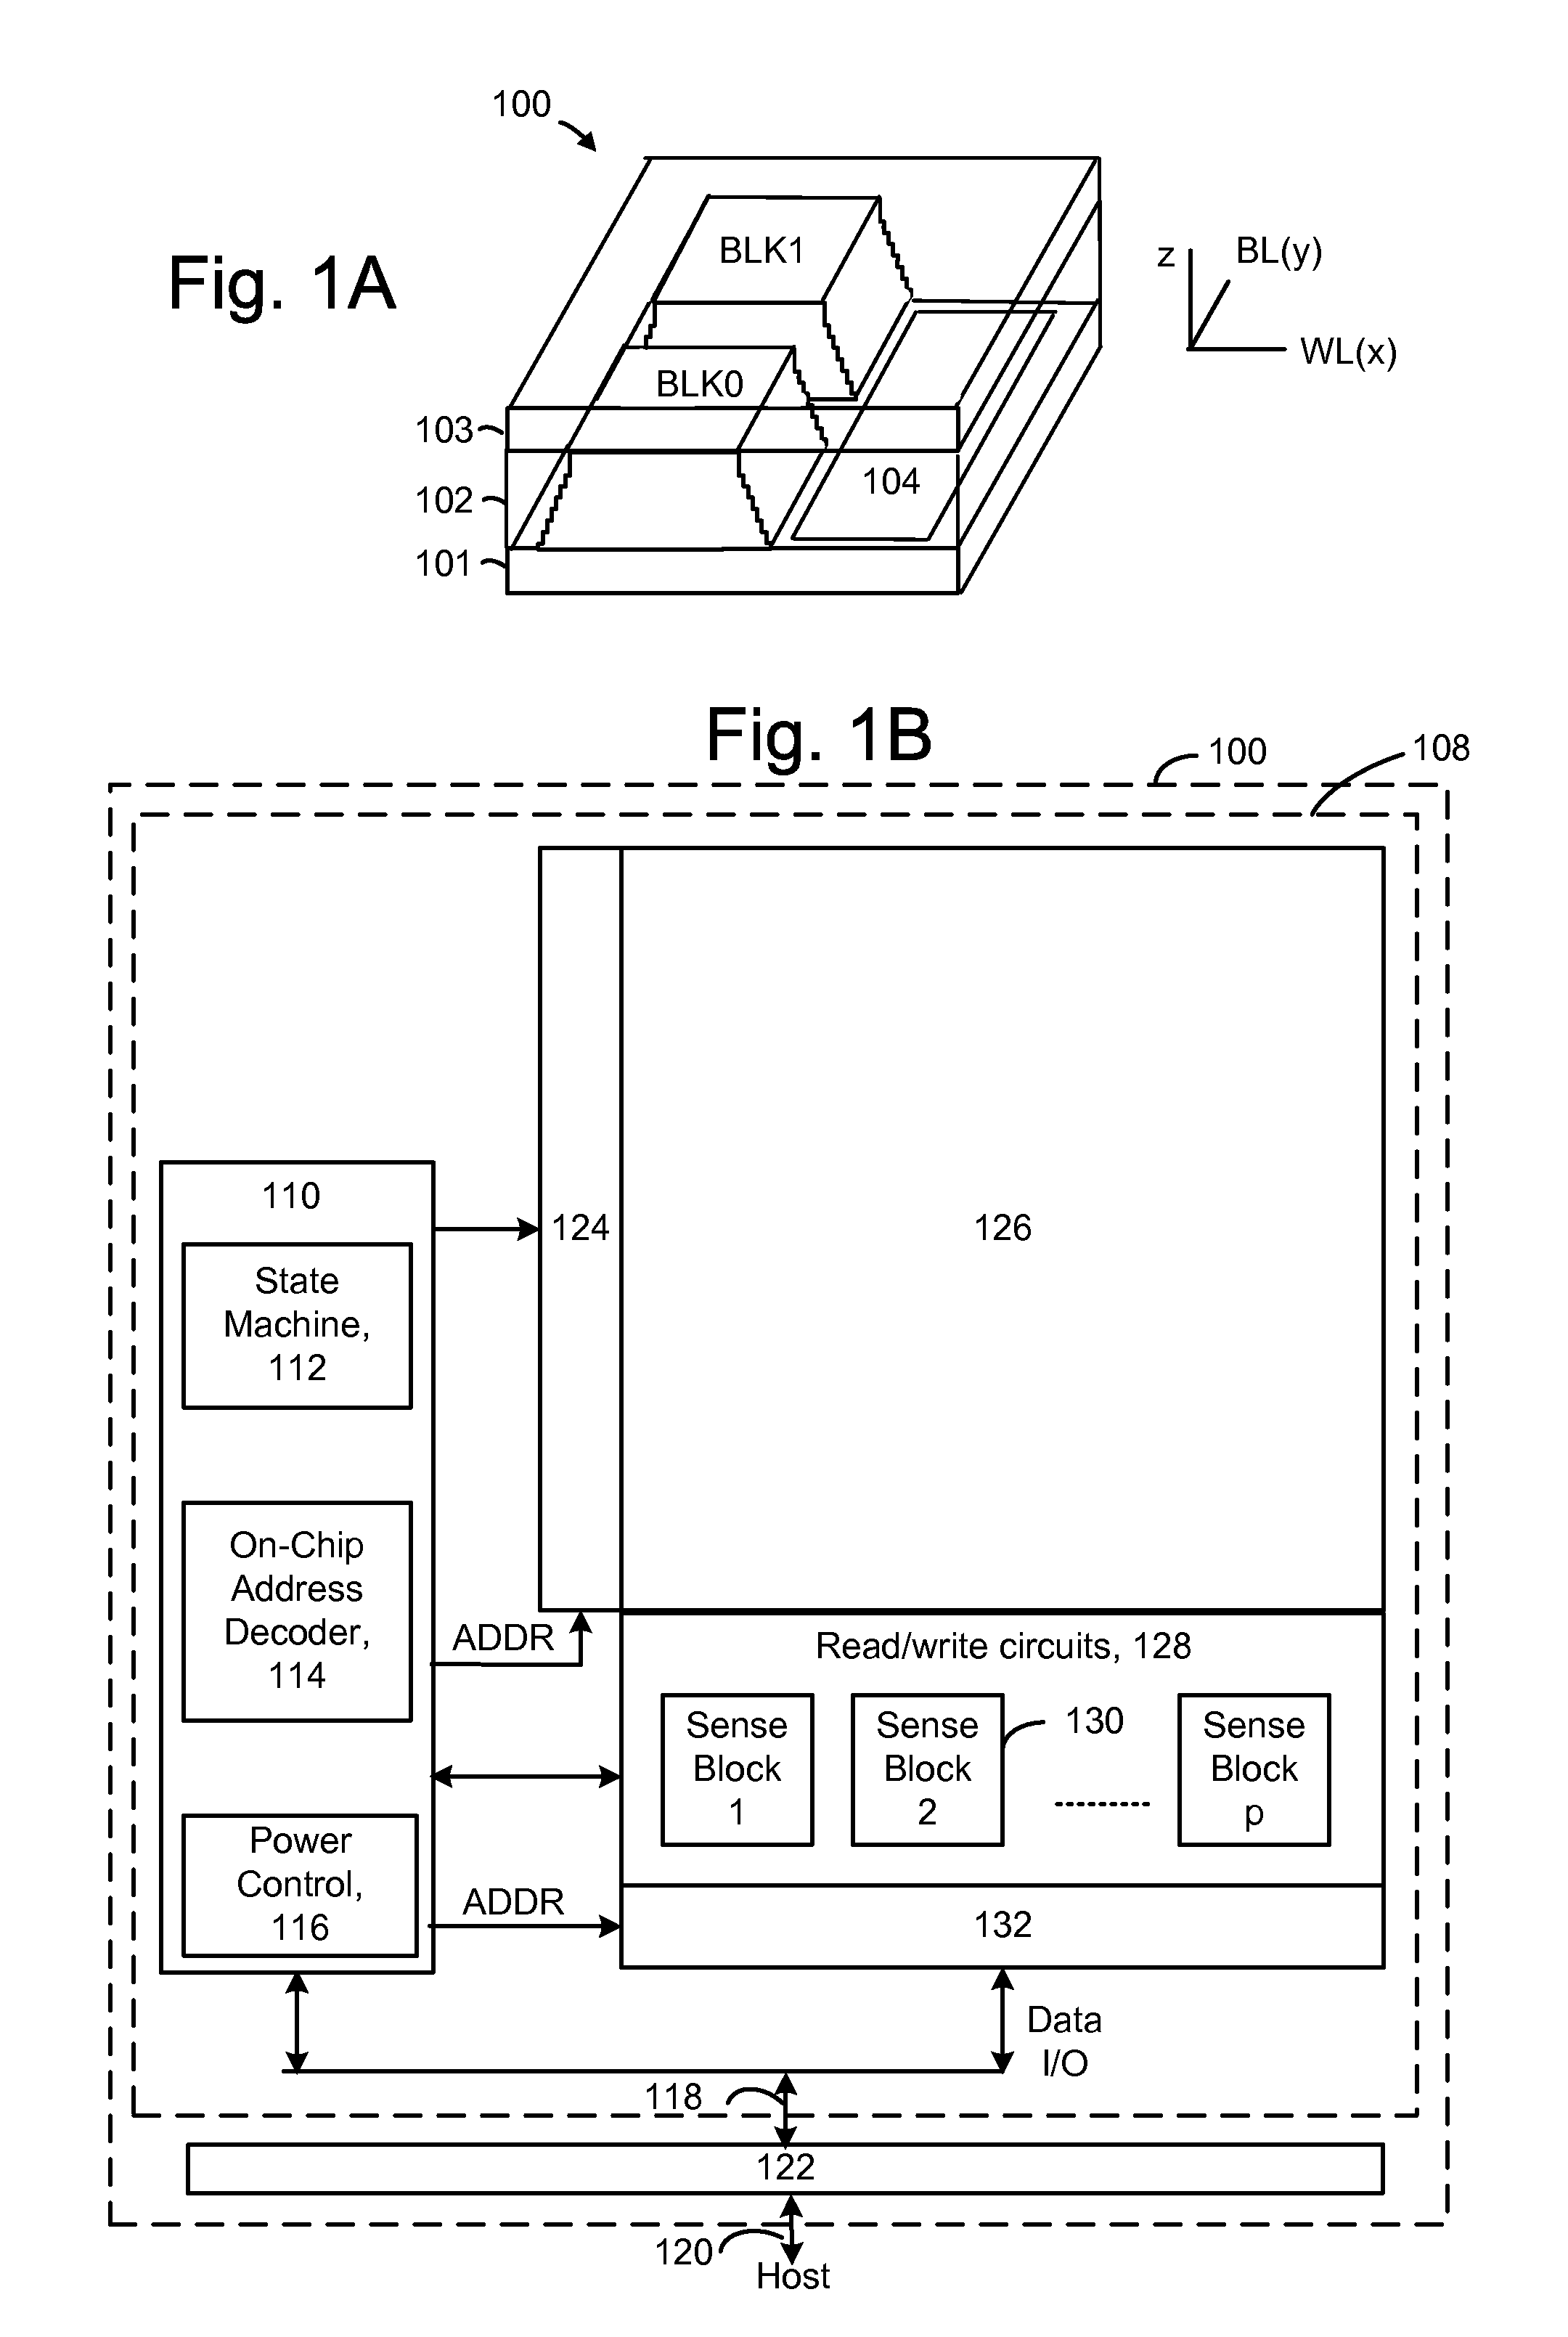 Adjusting Control Gate Overdrive Of Select Gate Transistors During Programming Of Non-Volatile Memory